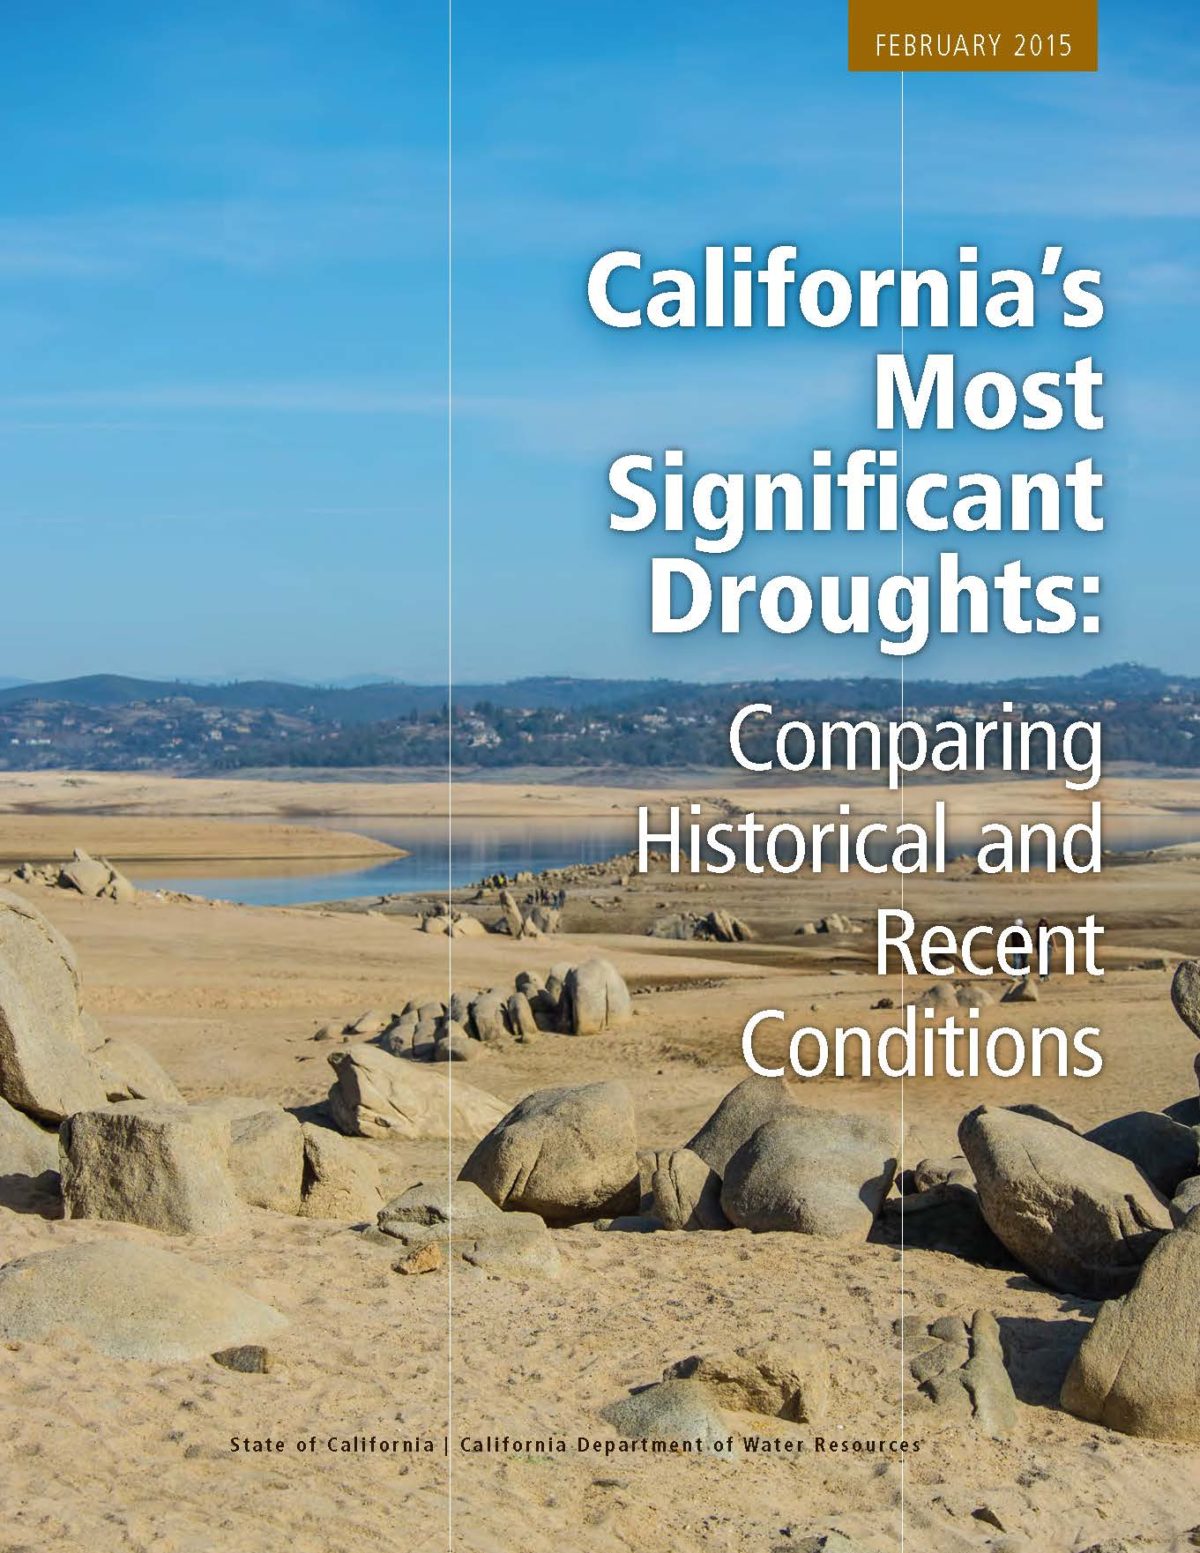 California’s most significant droughts: Comparing historical and recent conditions